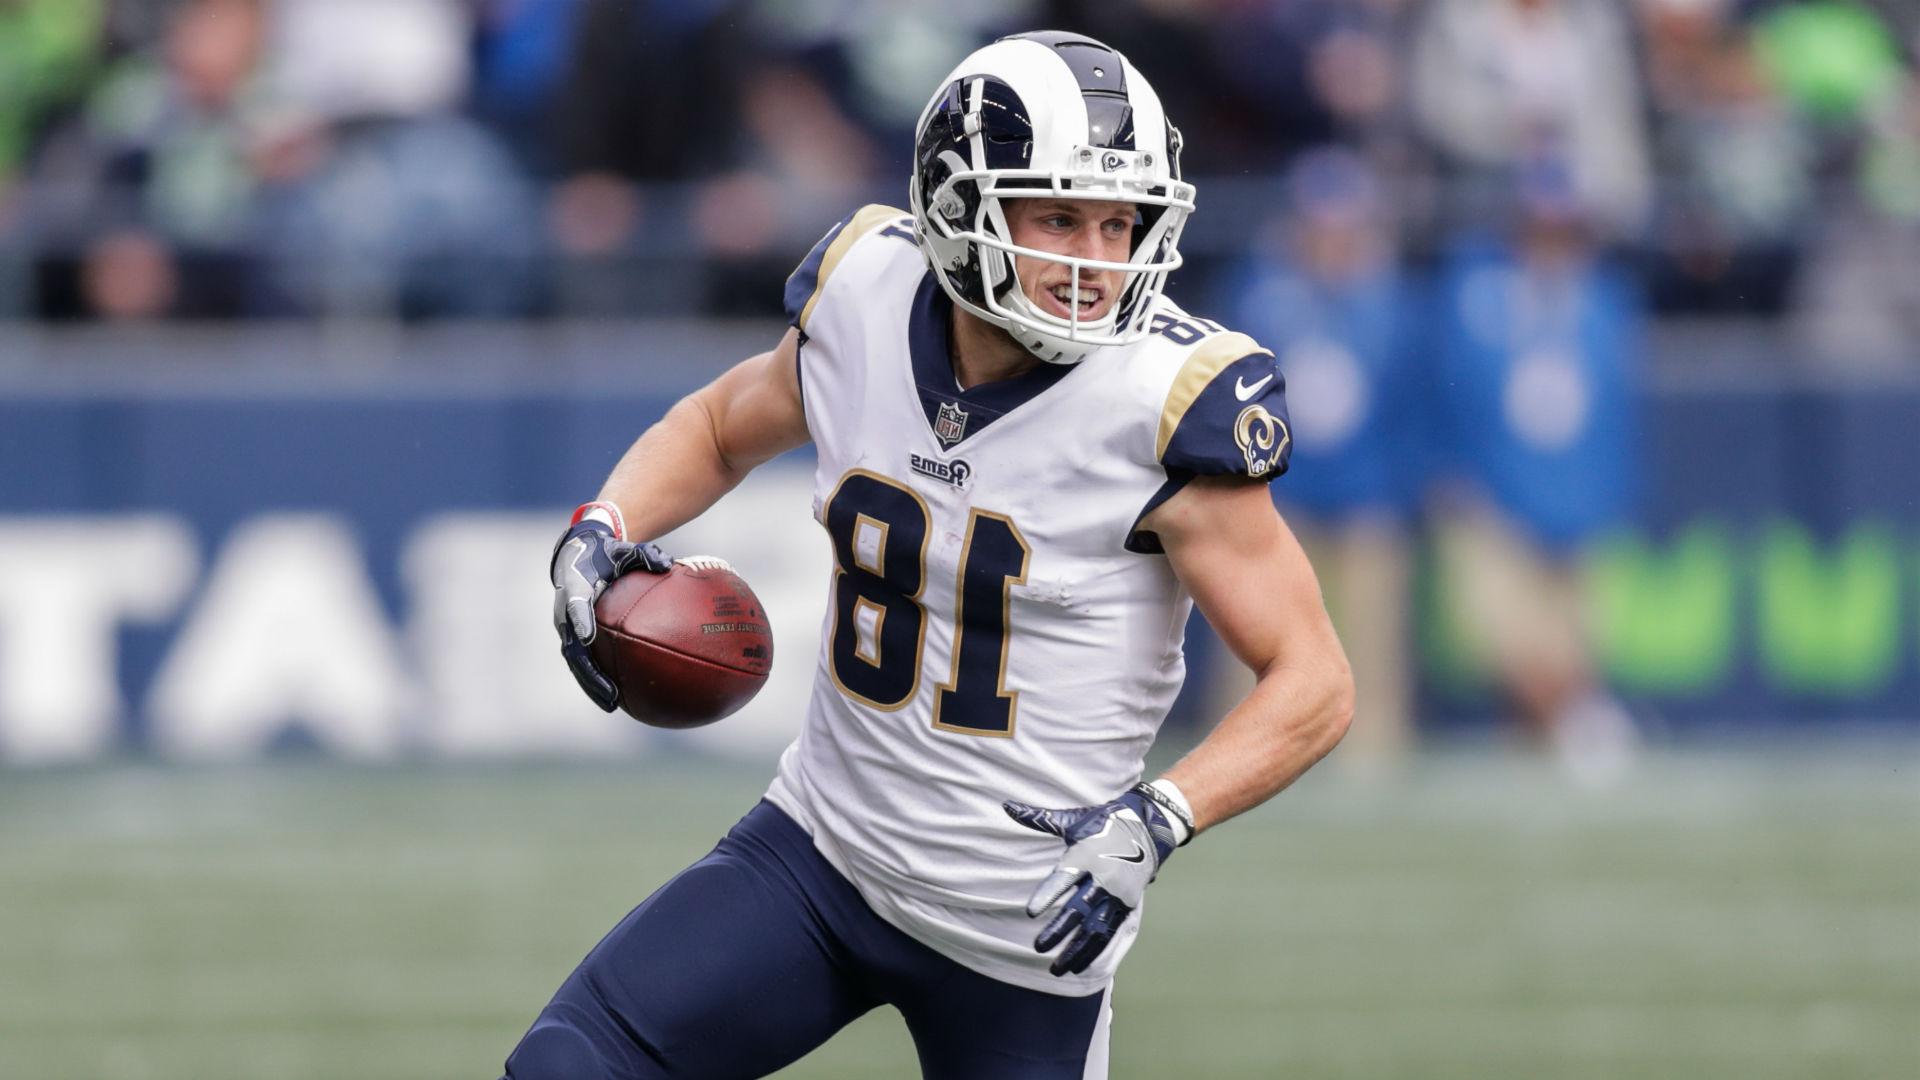 Offbeat: Cooper Kupp injury update: Rams WR out for season